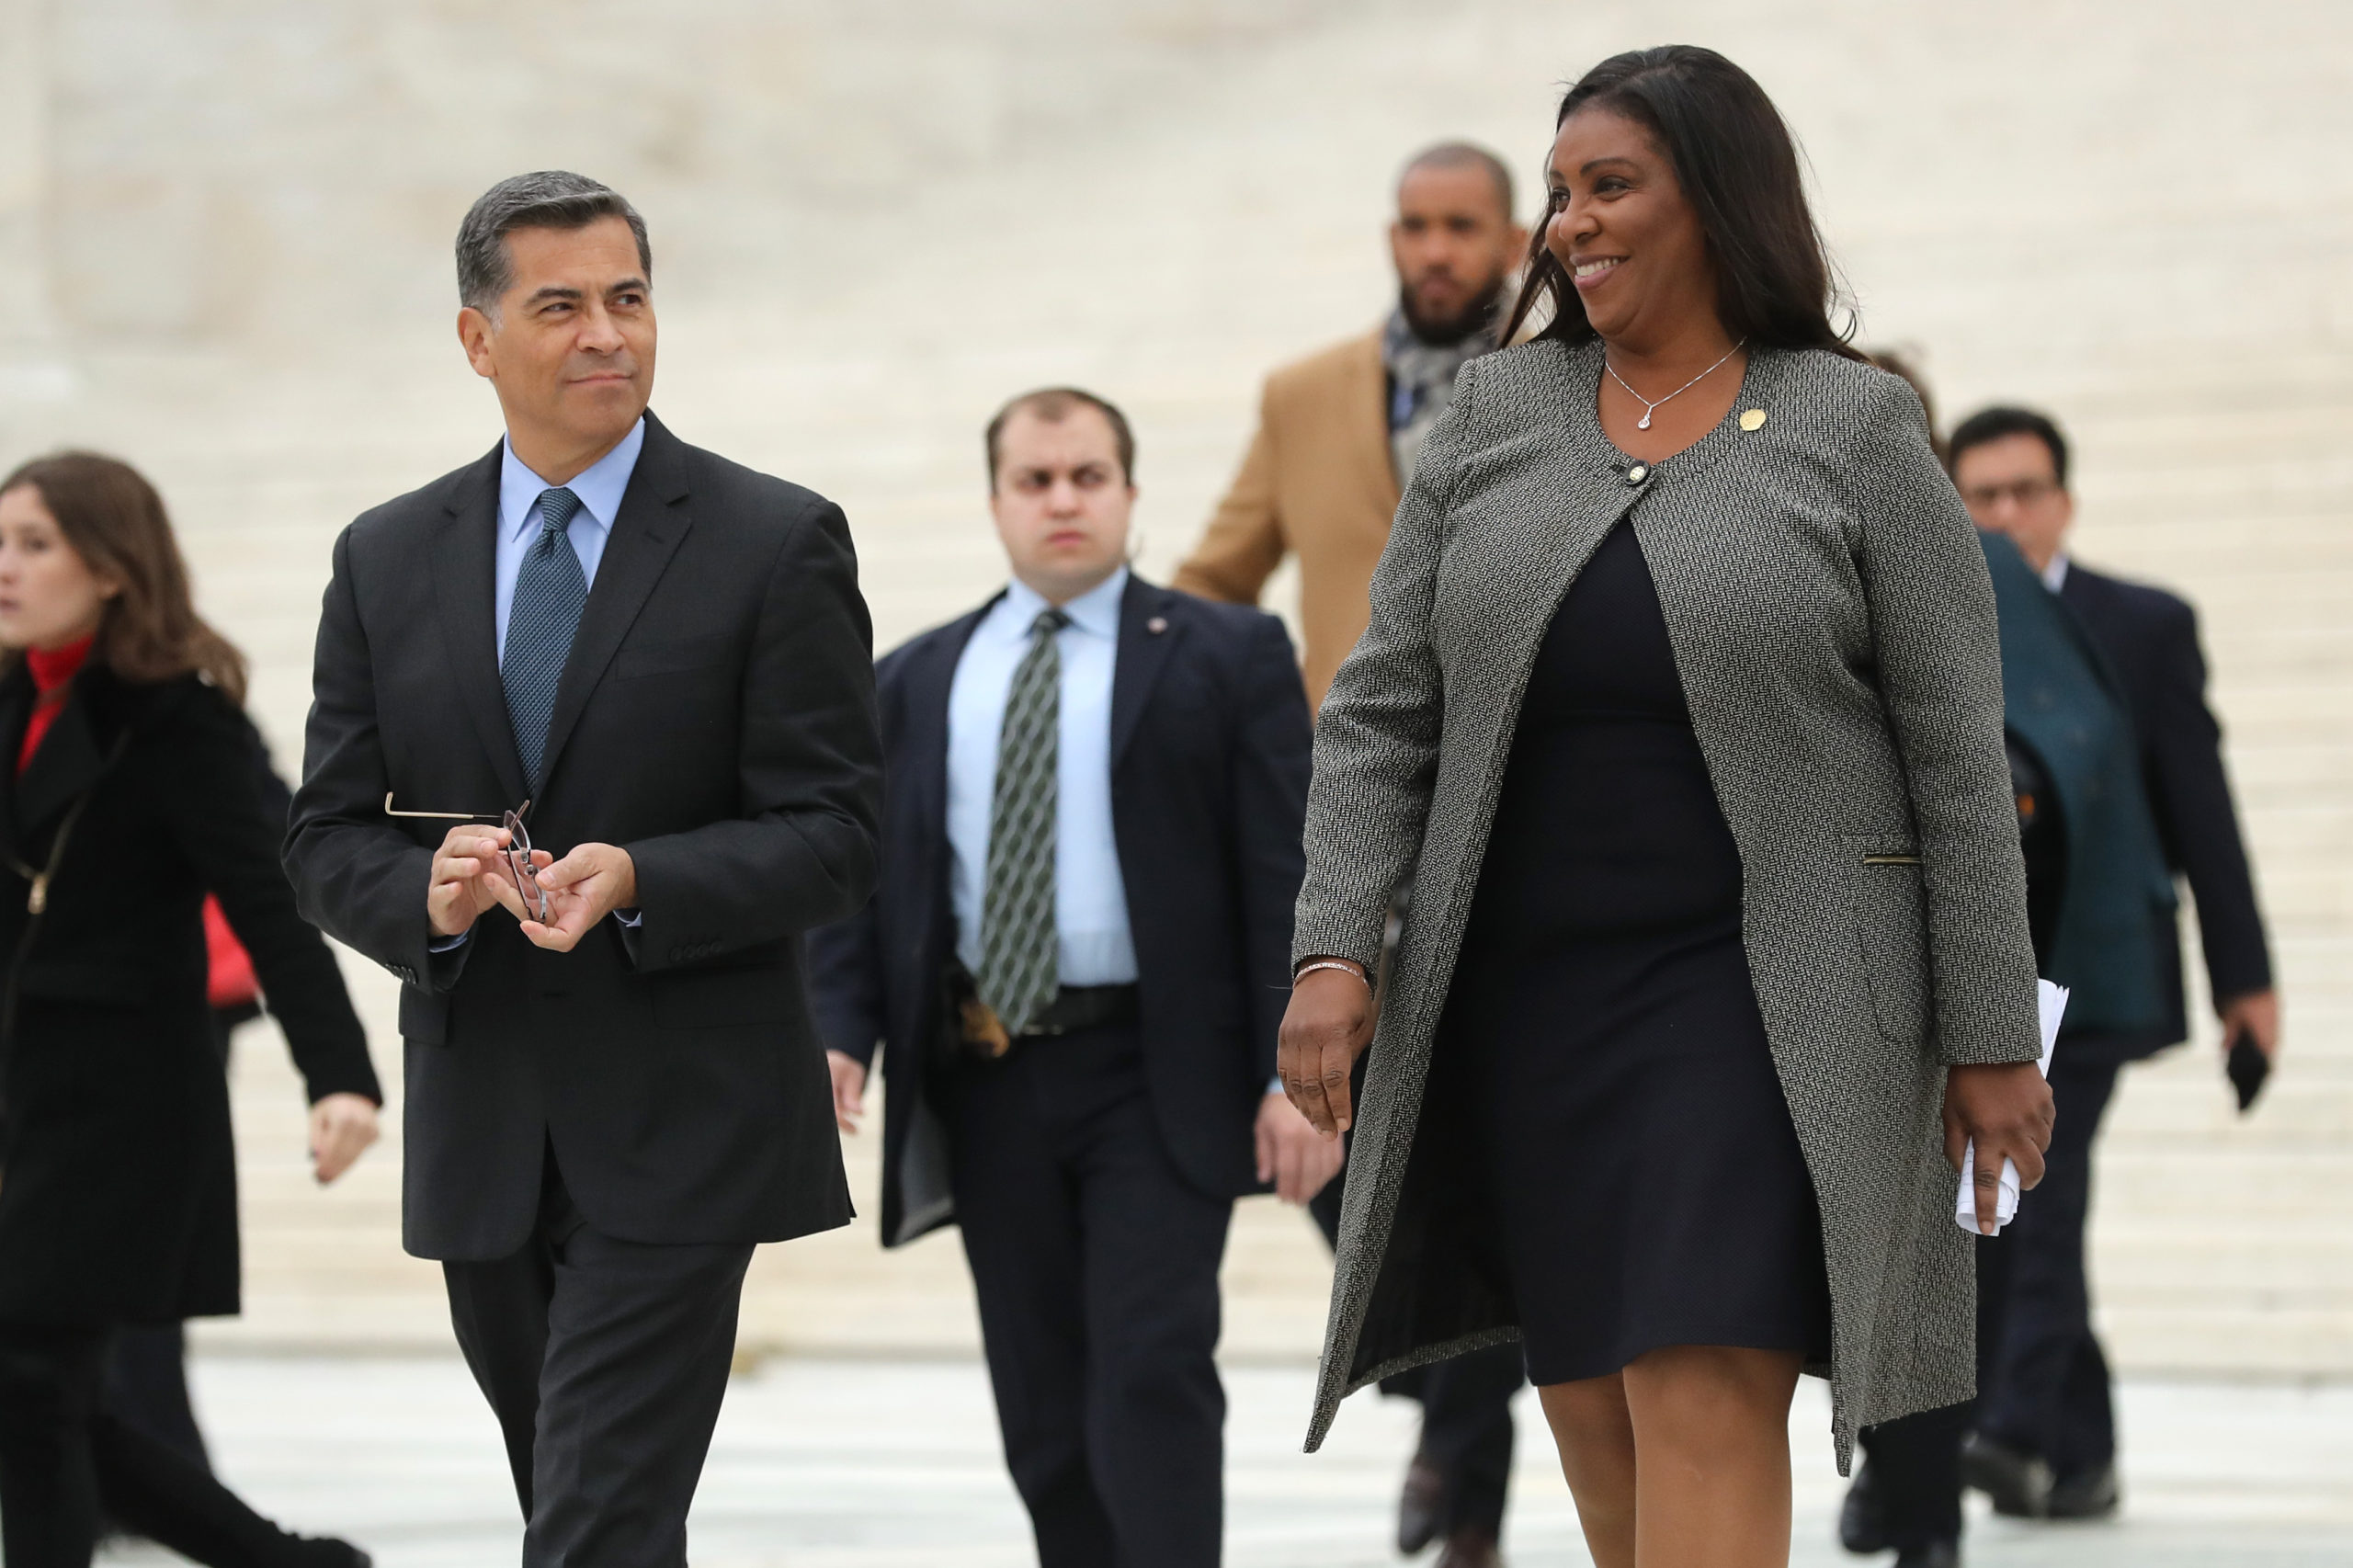 California Attorney General Xavier Becerra and New York Attorney General Letitia James walk out of the Supreme Court following arguments in a case about the Deferred Action on Childhood Arrivals program on November 12, 2019 in Washington, D.C. (Chip Somodevilla/Getty Images)